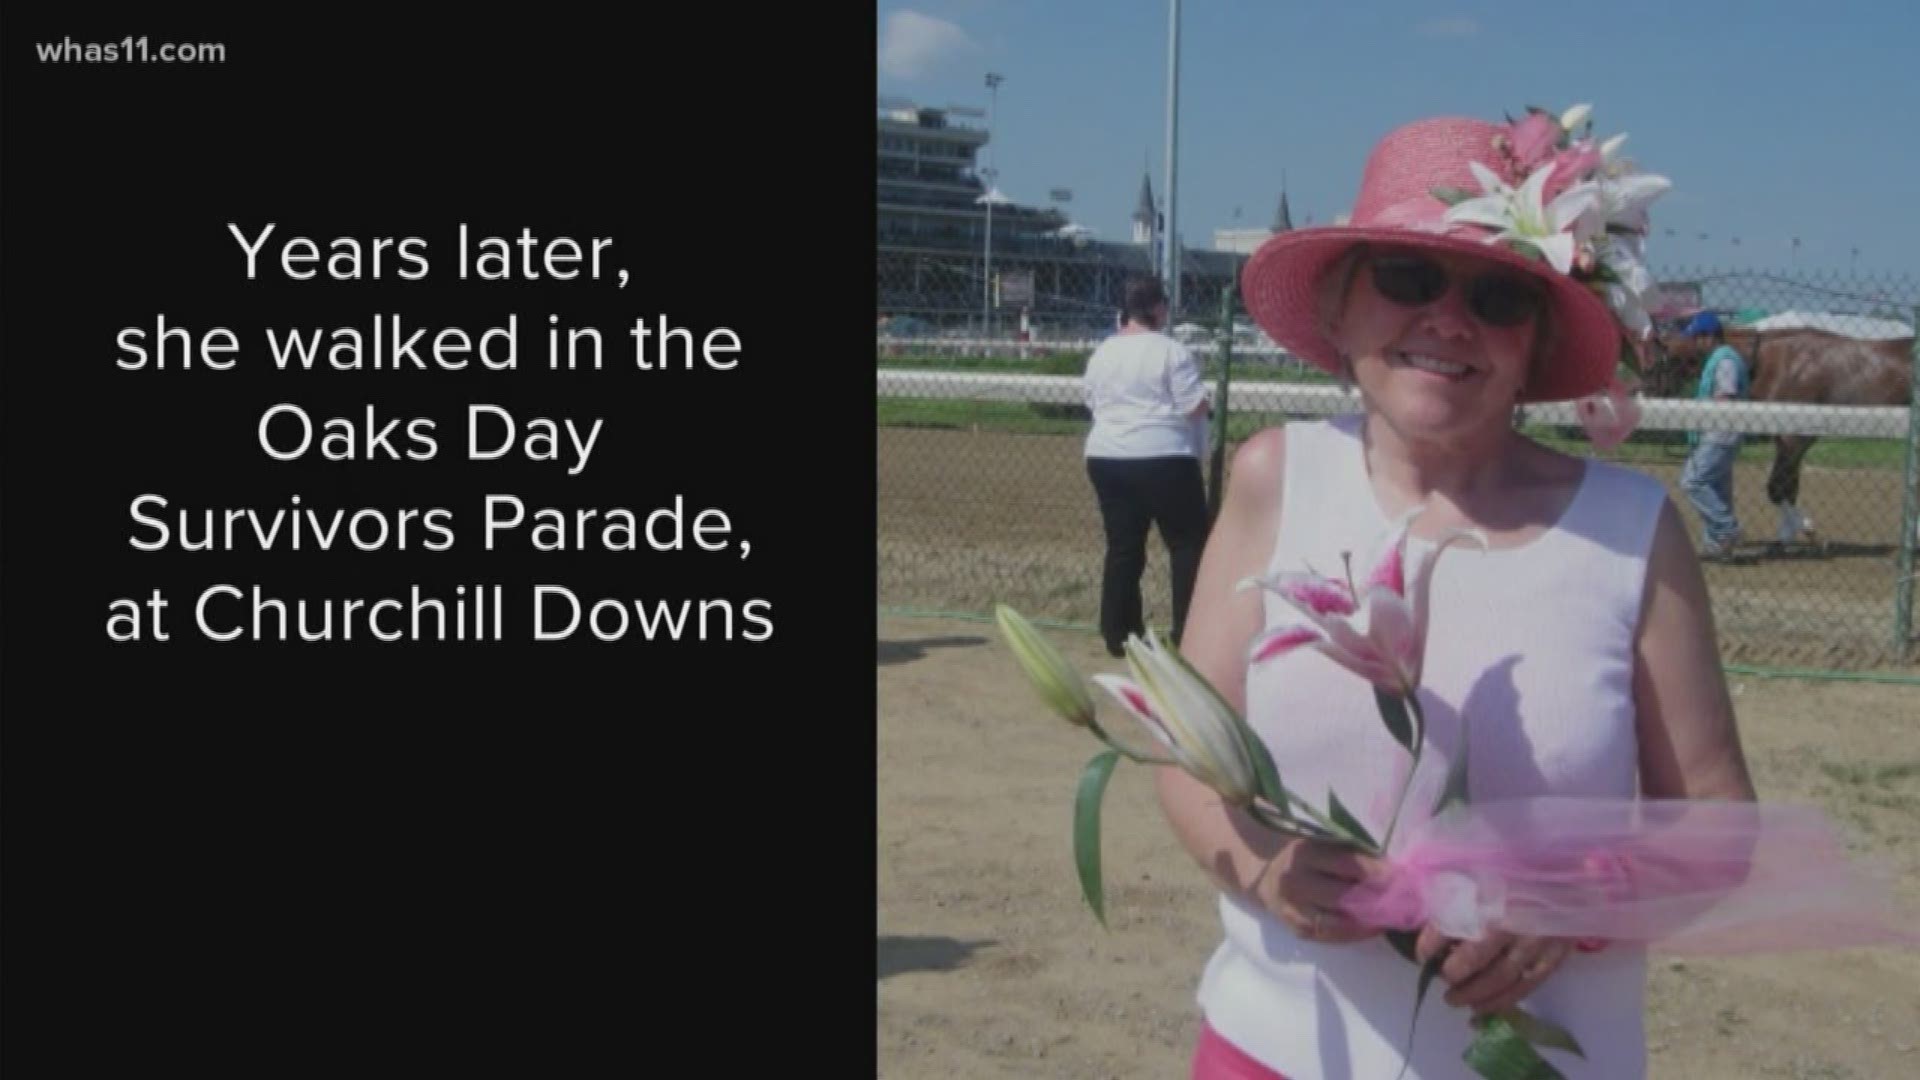 Meet Cyndi McHolland, She's one of the 145 survivors walking in today's Parade